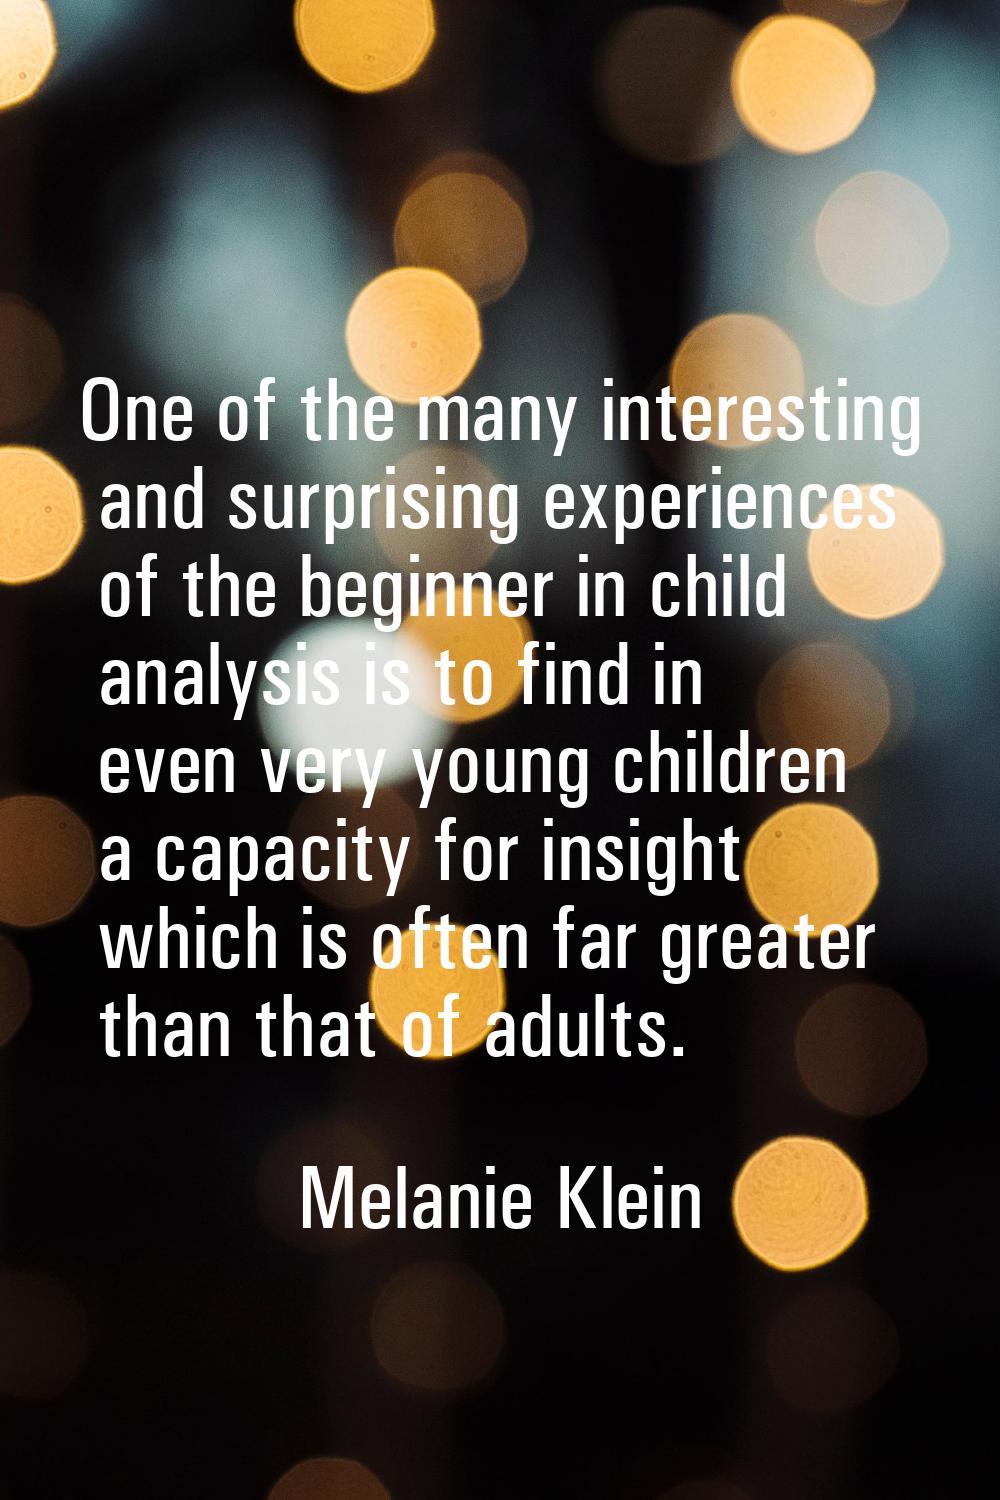 One of the many interesting and surprising experiences of the beginner in child analysis is to find